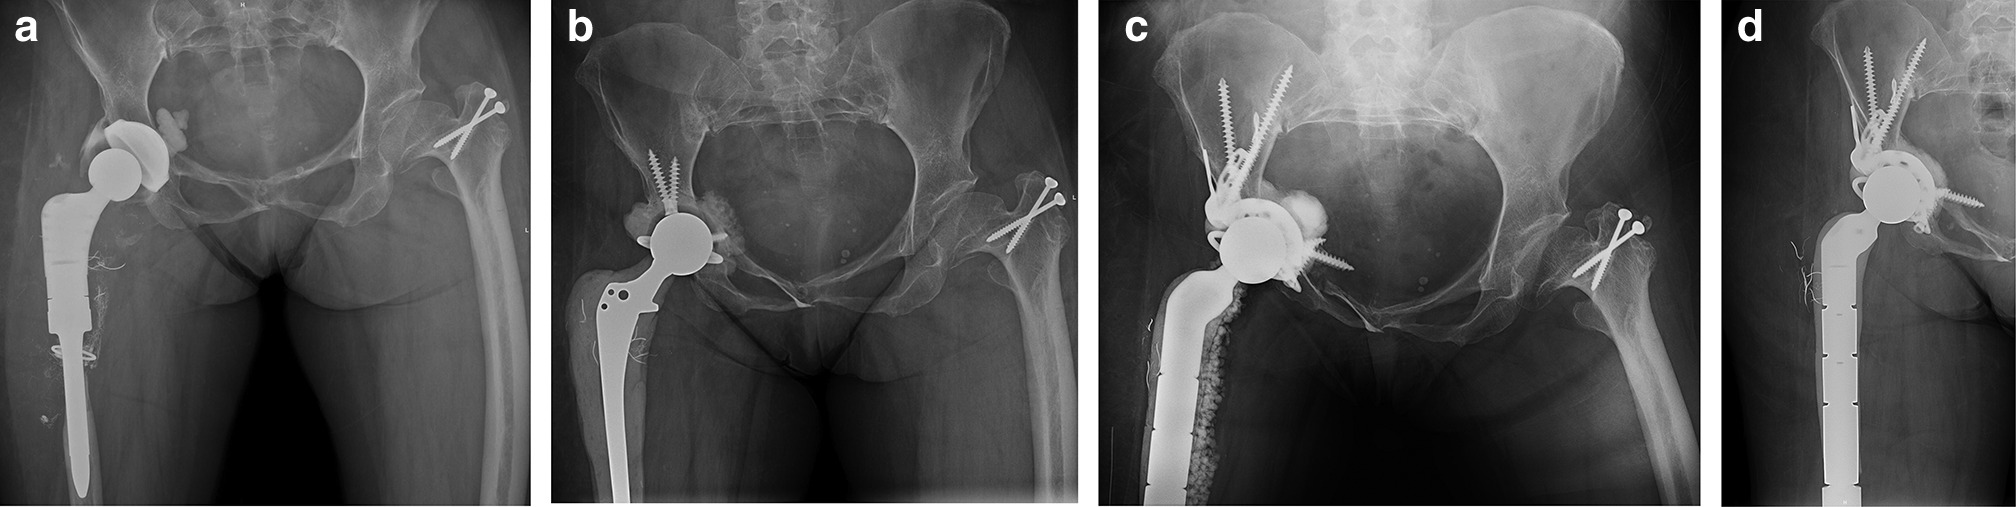 Fig. 2 
          a) Anteroposterior (AP) radiograph of pelvis and upper femur region showing infected endoprosthetic total hip arthroplasty (THA) of a 53-year-old female with a chronic periprosthetic joint infection of her fourth revision right THA. The patient has epiphyseal dysplasia. A draining sinus was present over the lateral mid-thigh. A polyethylene bearing is cemented into the cementless cup. There is cement behind the metal cup. The infecting organism was Cutibacterium. b) AP radiograph of endoprosthetic PROSTALAC (PROSThesis Antibiotic Loaded Acrylic Cement) construct at six months. The patient is ambulatory with partial weight with a walker. Three preoperative aspirations are negative. c) Postoperative AP radiograph showing pelvic reconstruction with MaxTi triflange cage; 10 ml of Cerament was injected behind the cage into all defects before cementing the acetabular component into the cage. A constrained bearing was cemented into the cage construct. d) AP pelvic radiograph 12 months postoperatively. The pelvic reconstruction remains stable. Note the area of Cerament where remodelling has occurred. Remodelling is rated radiologically as moderate.
        